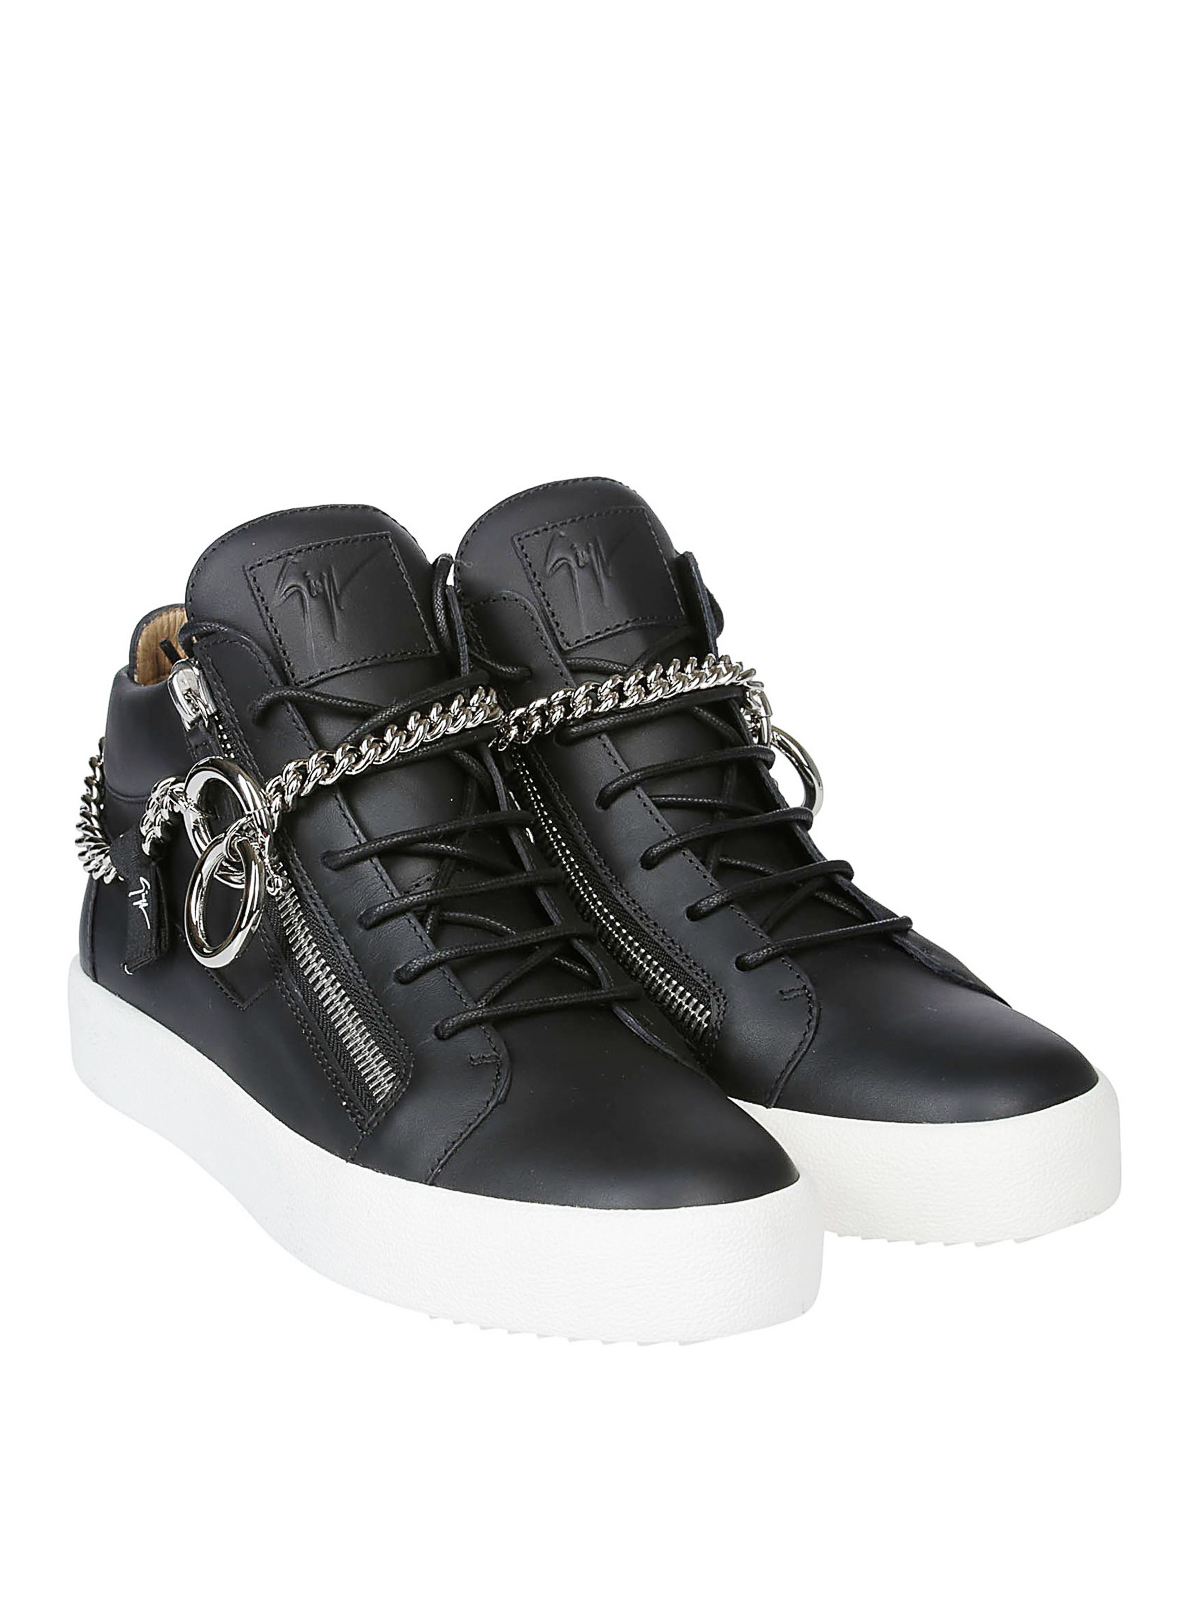 Trainers Giuseppe Zanotti - Chain high top leather sneakers -